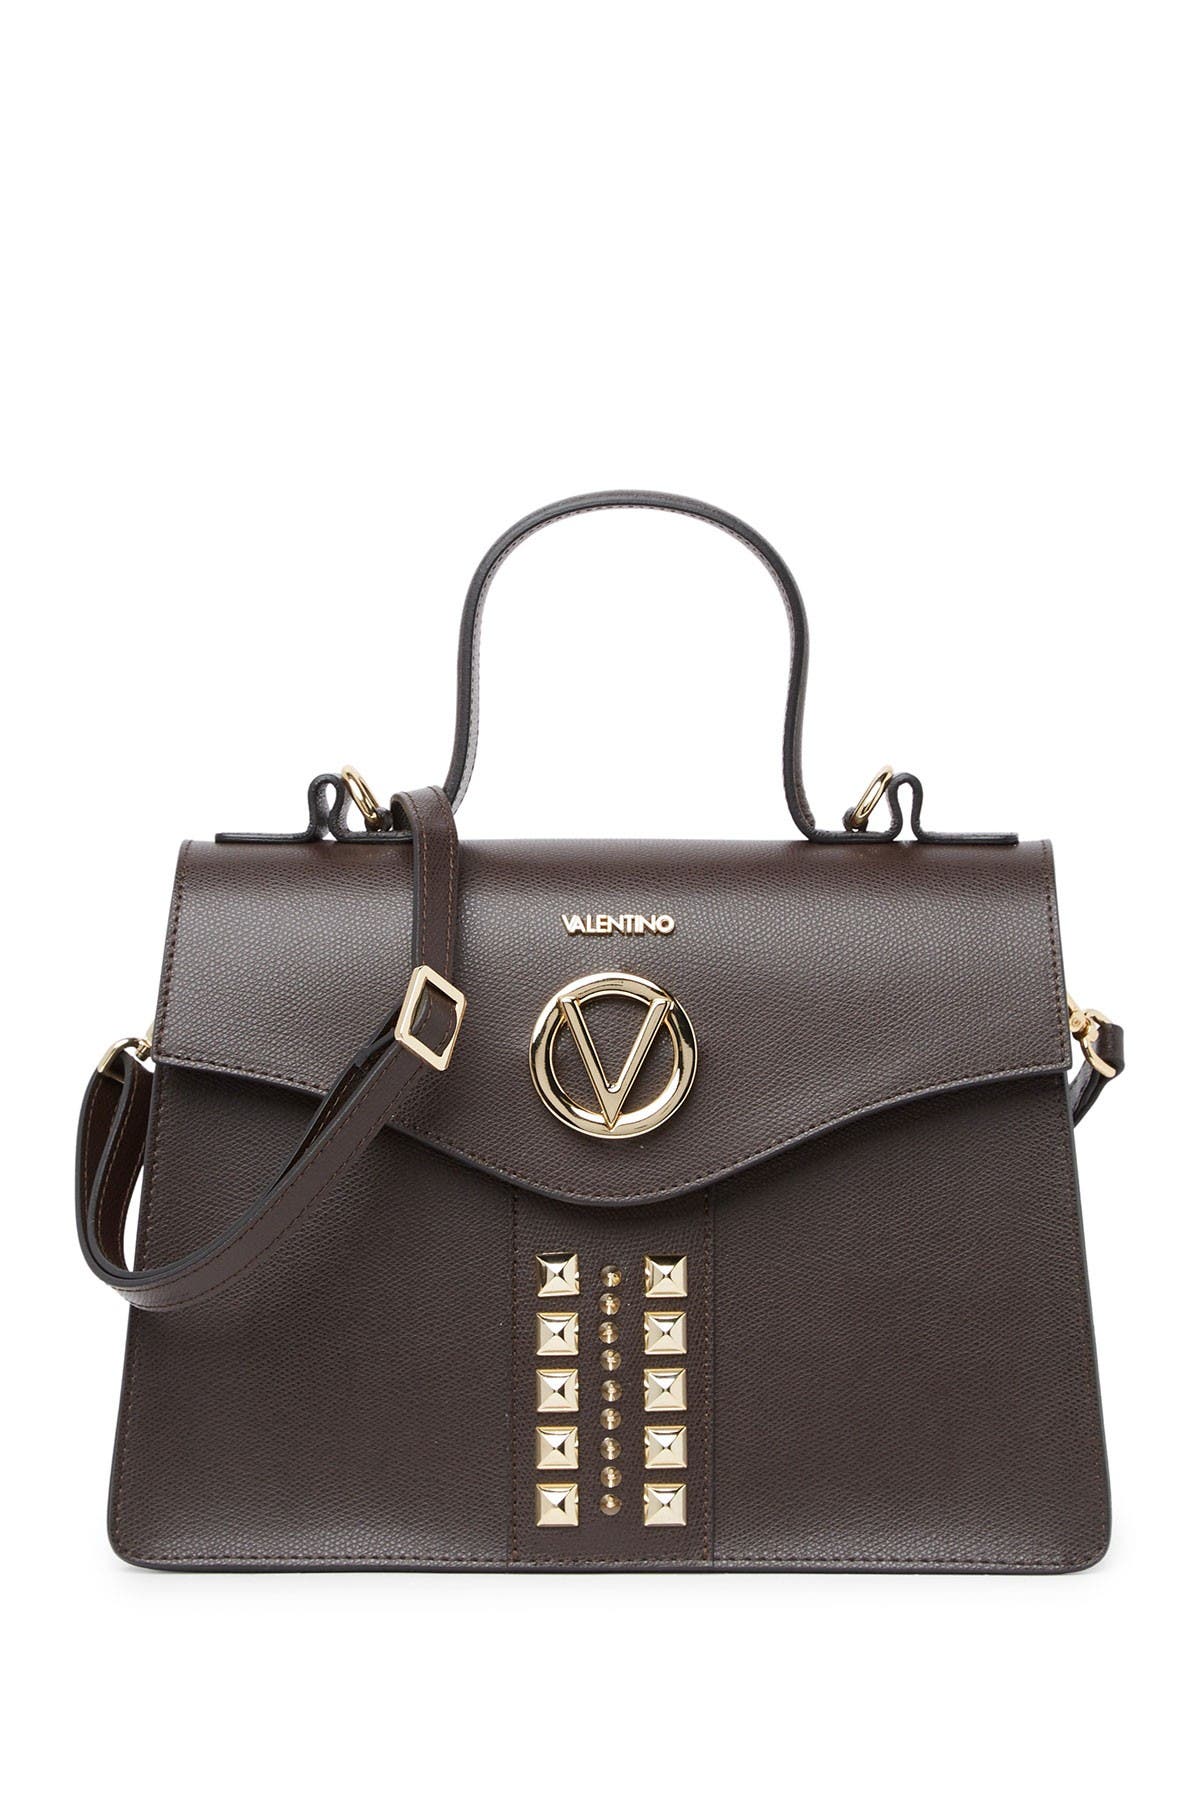 Valentino By Mario Valentino Melanie Leather Top Handle Bag In ...